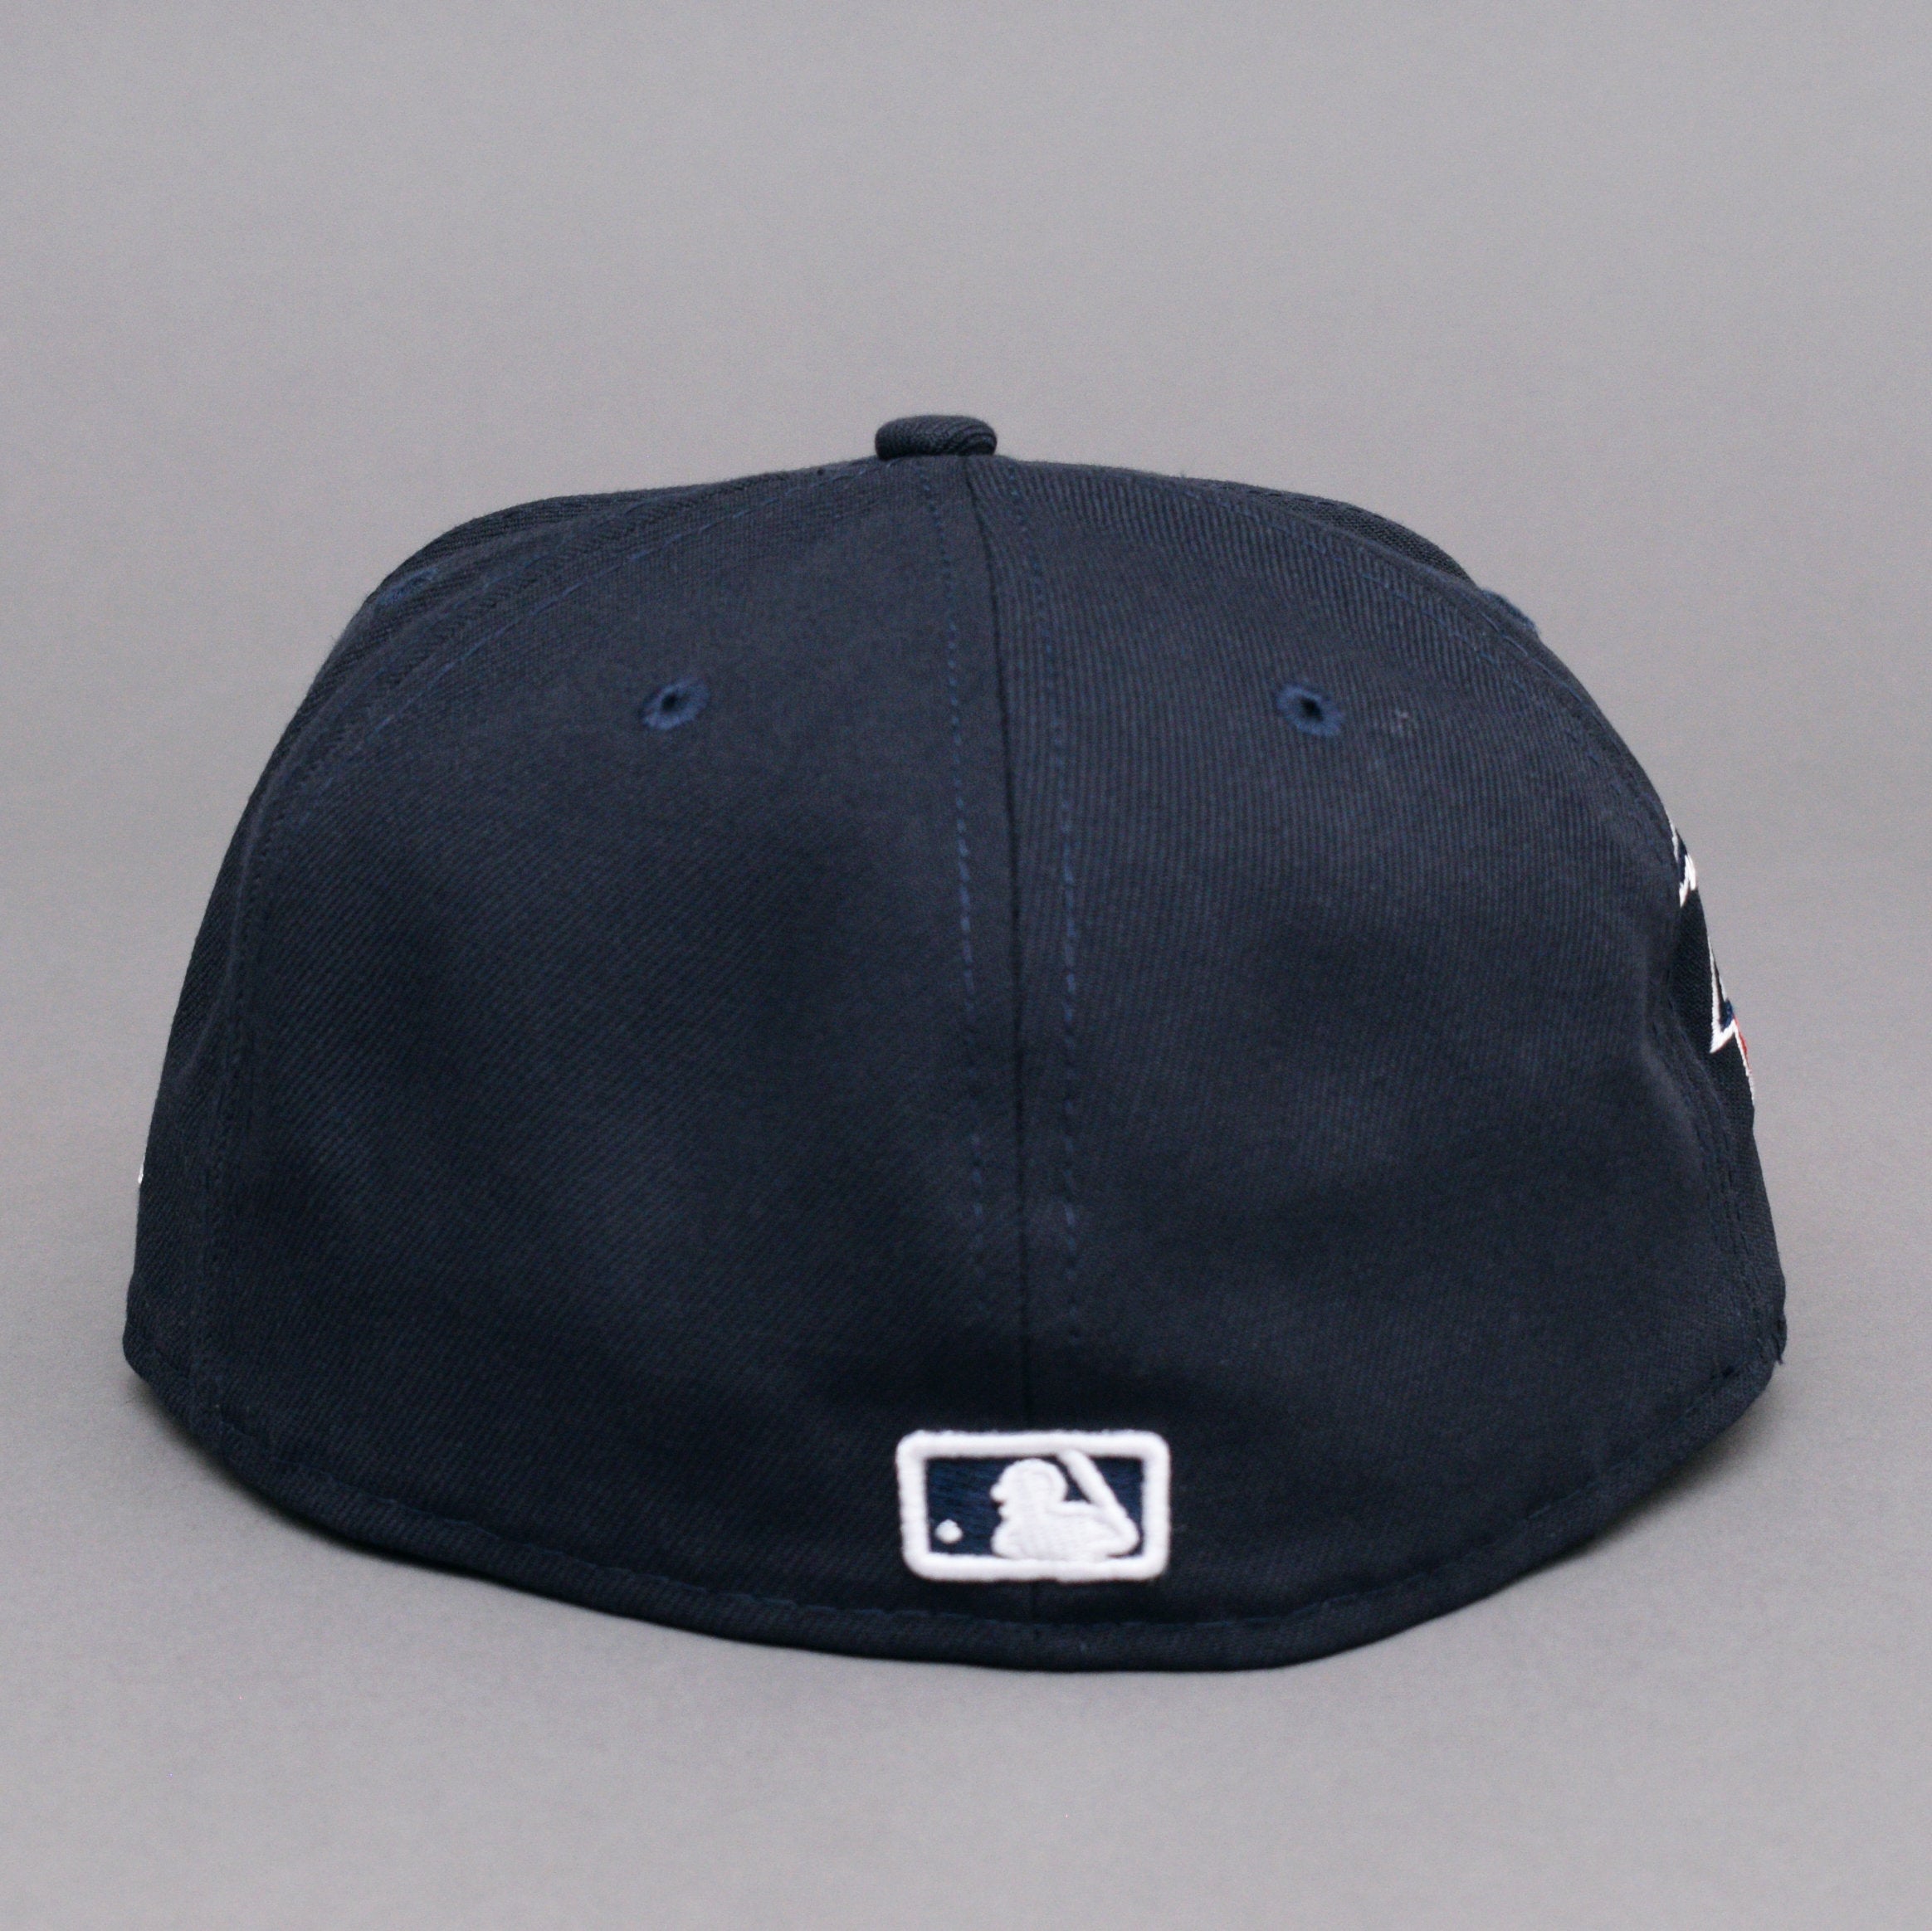 New Era - NY Yankees 59Fifty Team League - Fitted - Navy/White